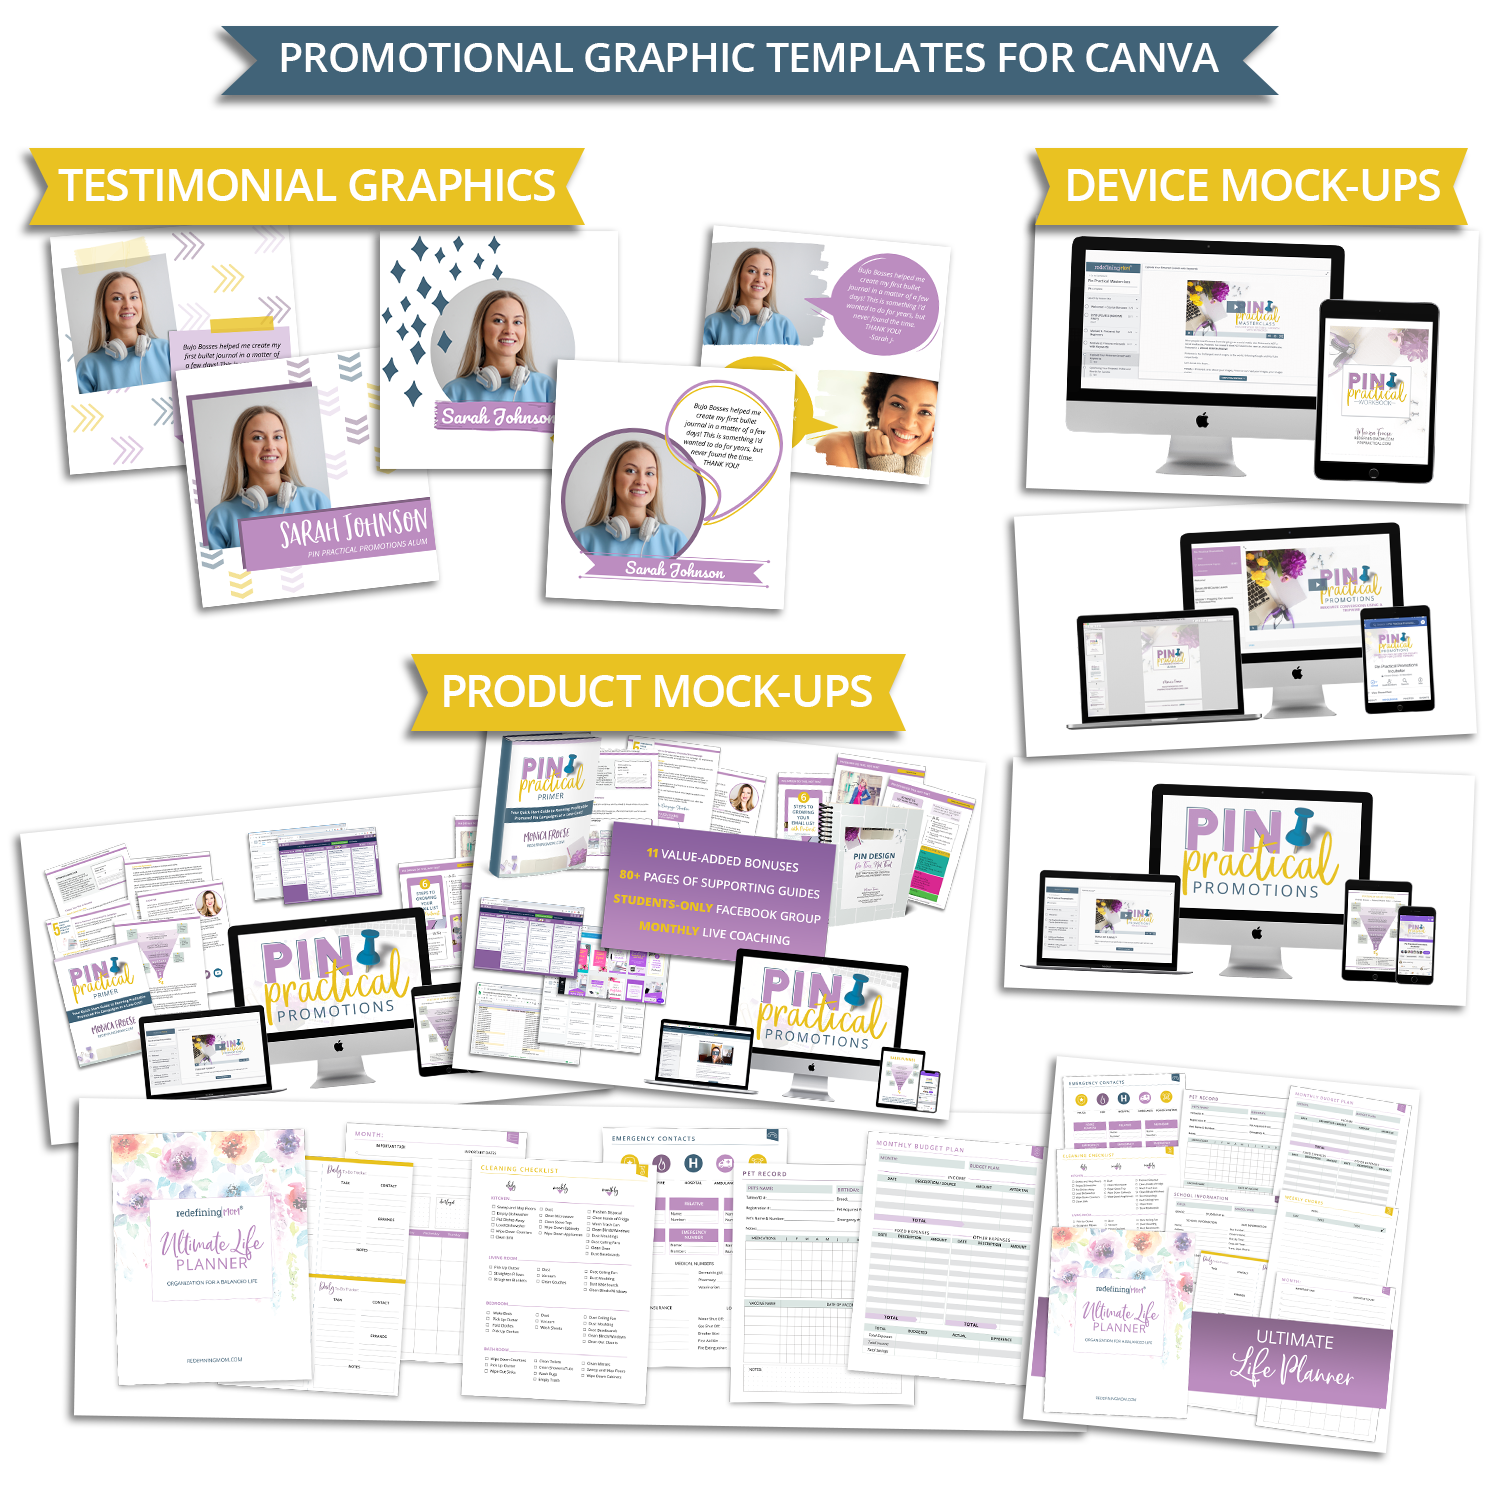 Sales Page Promo Image Templates for Canva